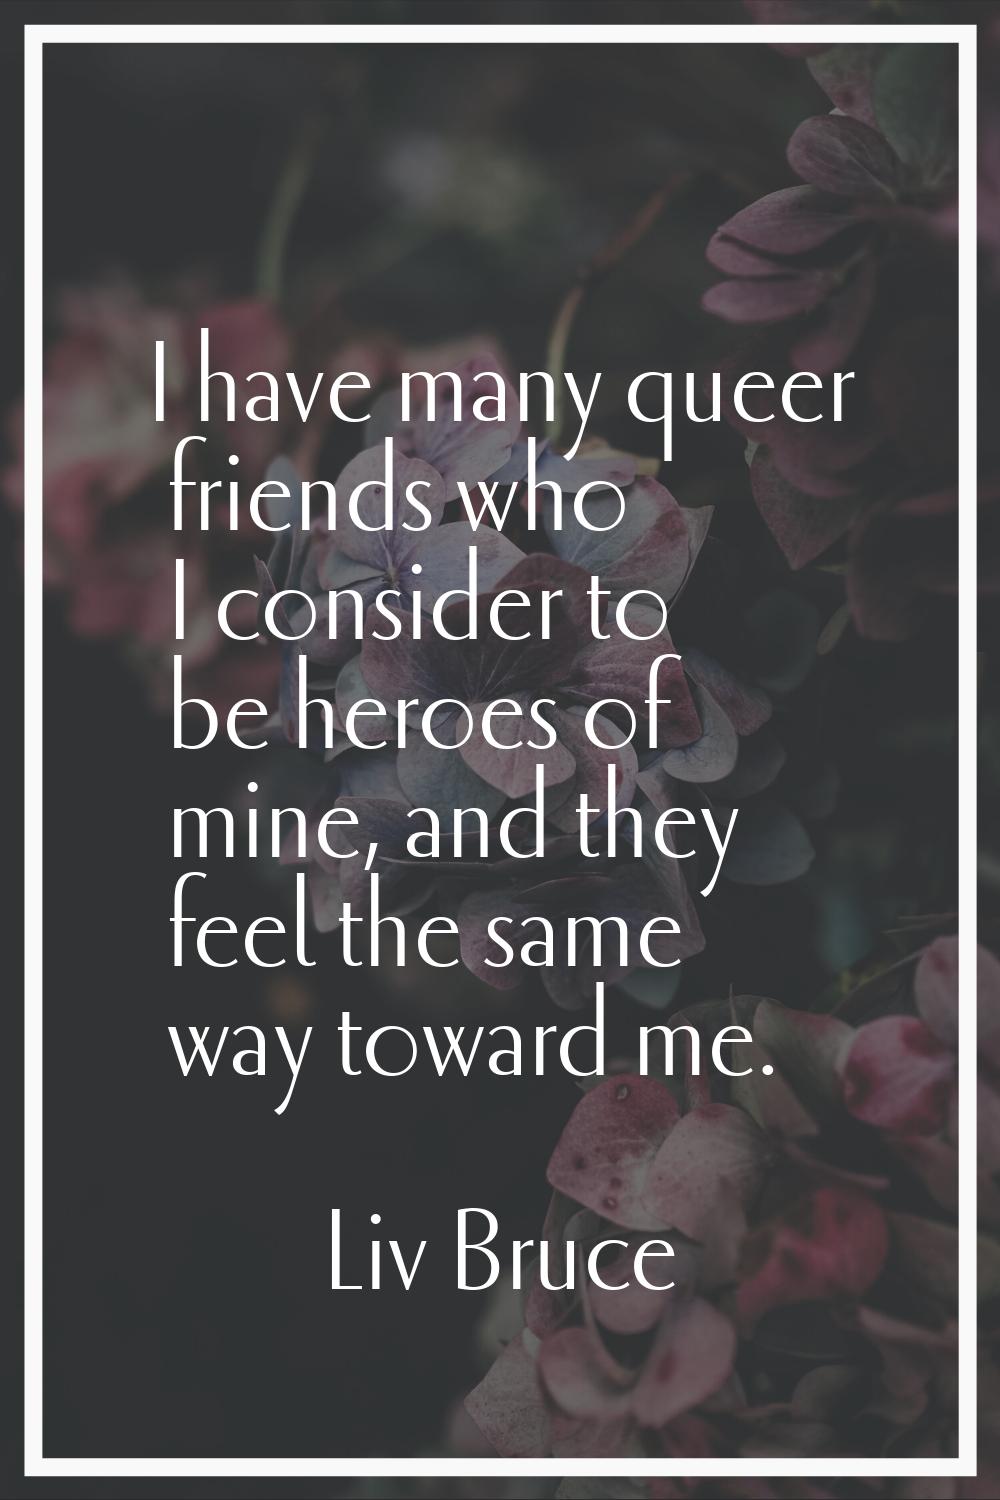 I have many queer friends who I consider to be heroes of mine, and they feel the same way toward me